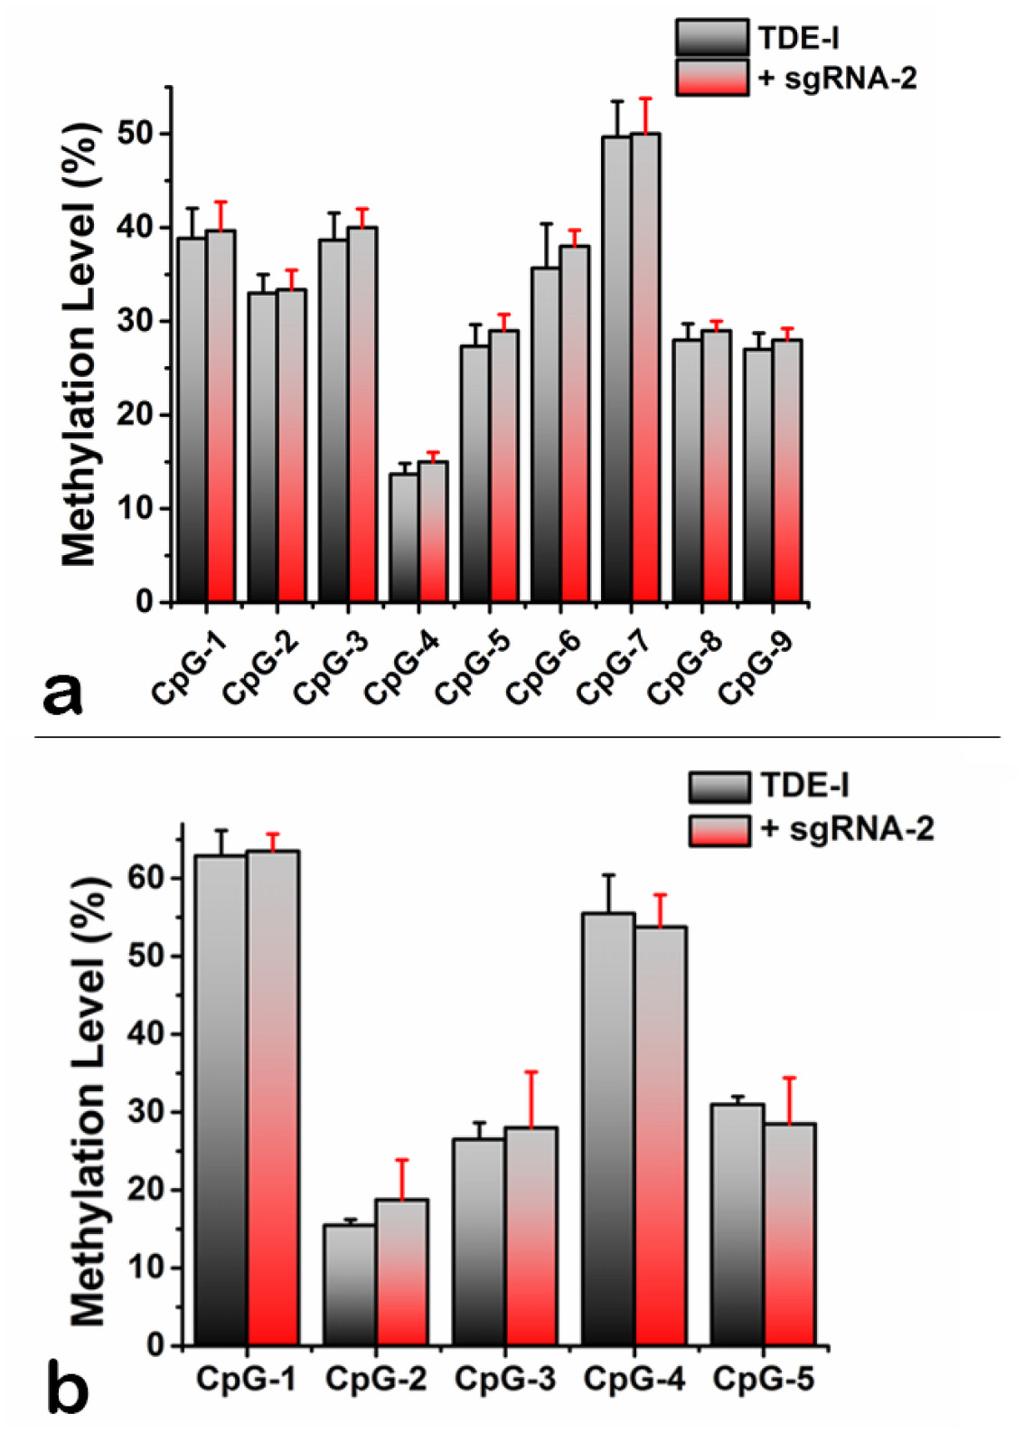 Supplementary Figure S5: Quantitative determination of DNA demethylation level at the target CpG sites in BRCA1 promoter.